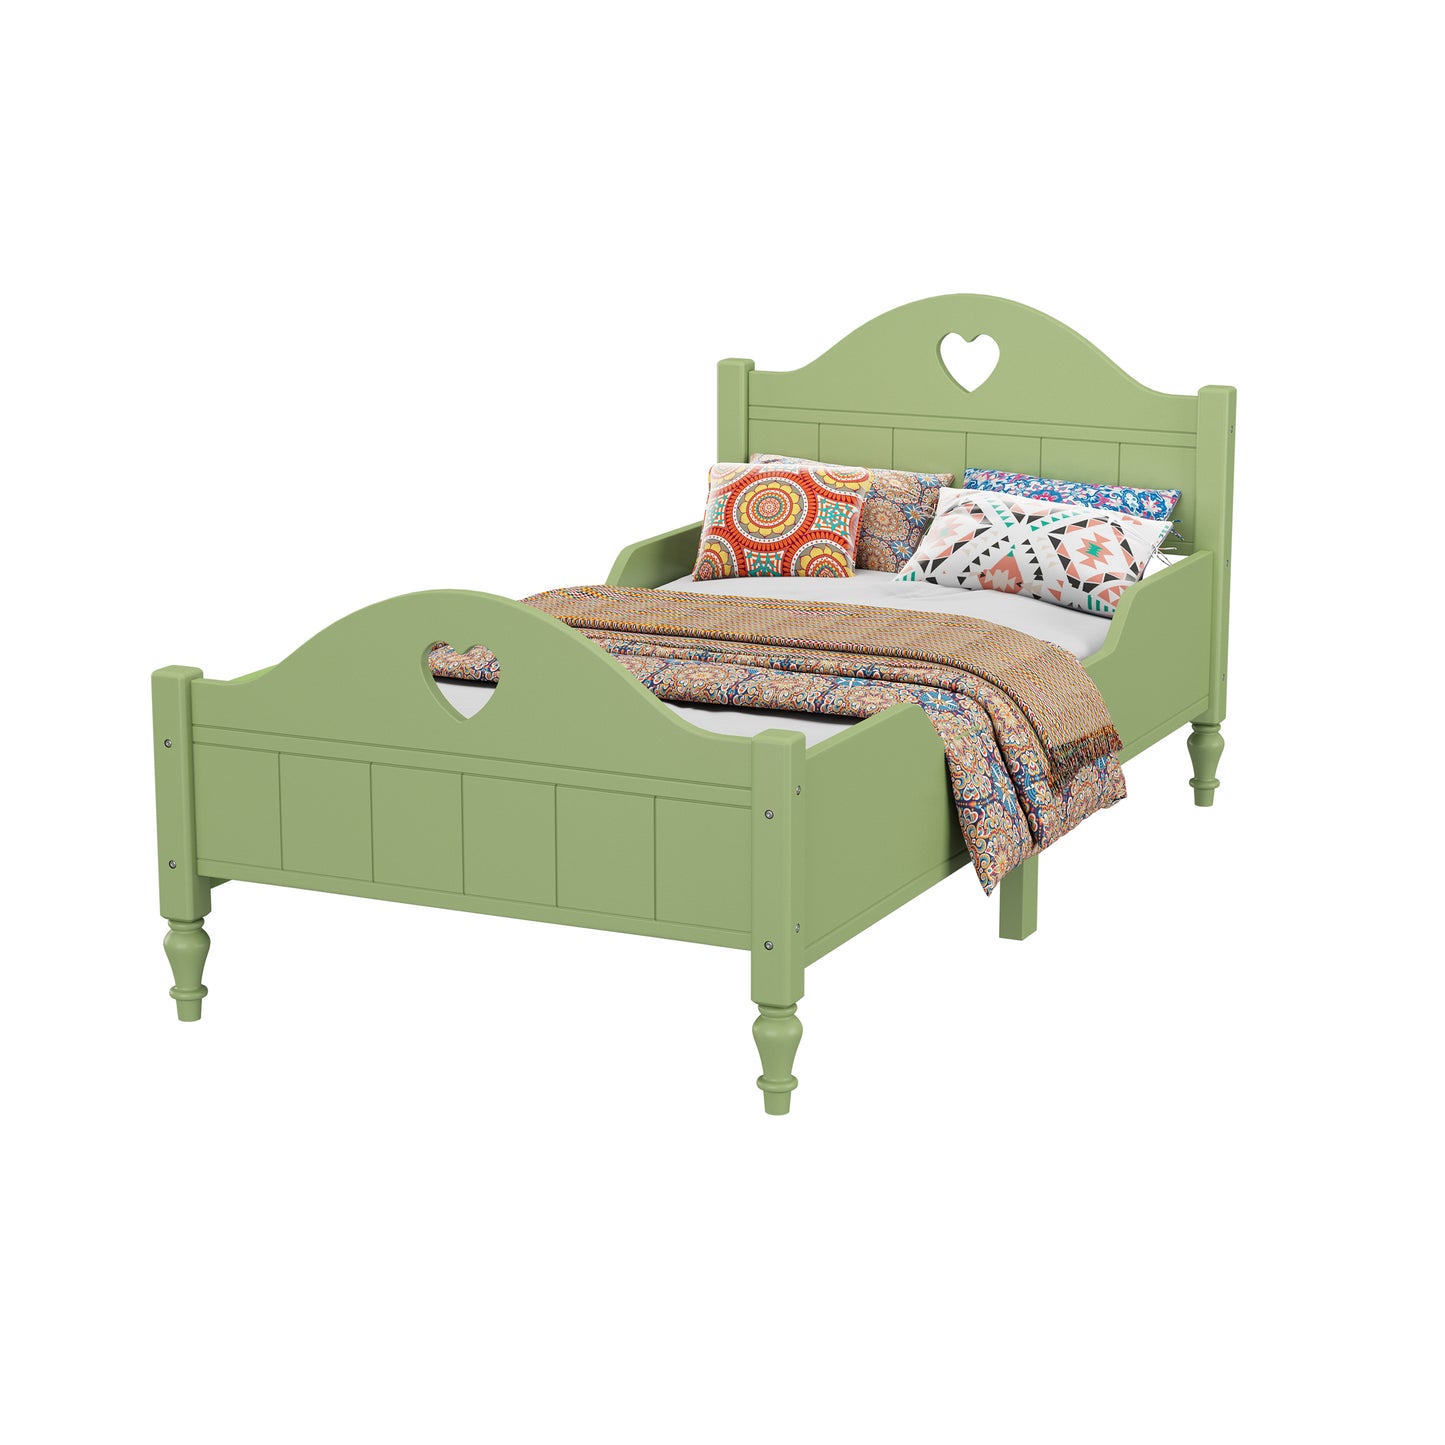 Macaron Twin Size Toddler Bed with Side Safety Rails and Headboard and Footboard,Oliver Green